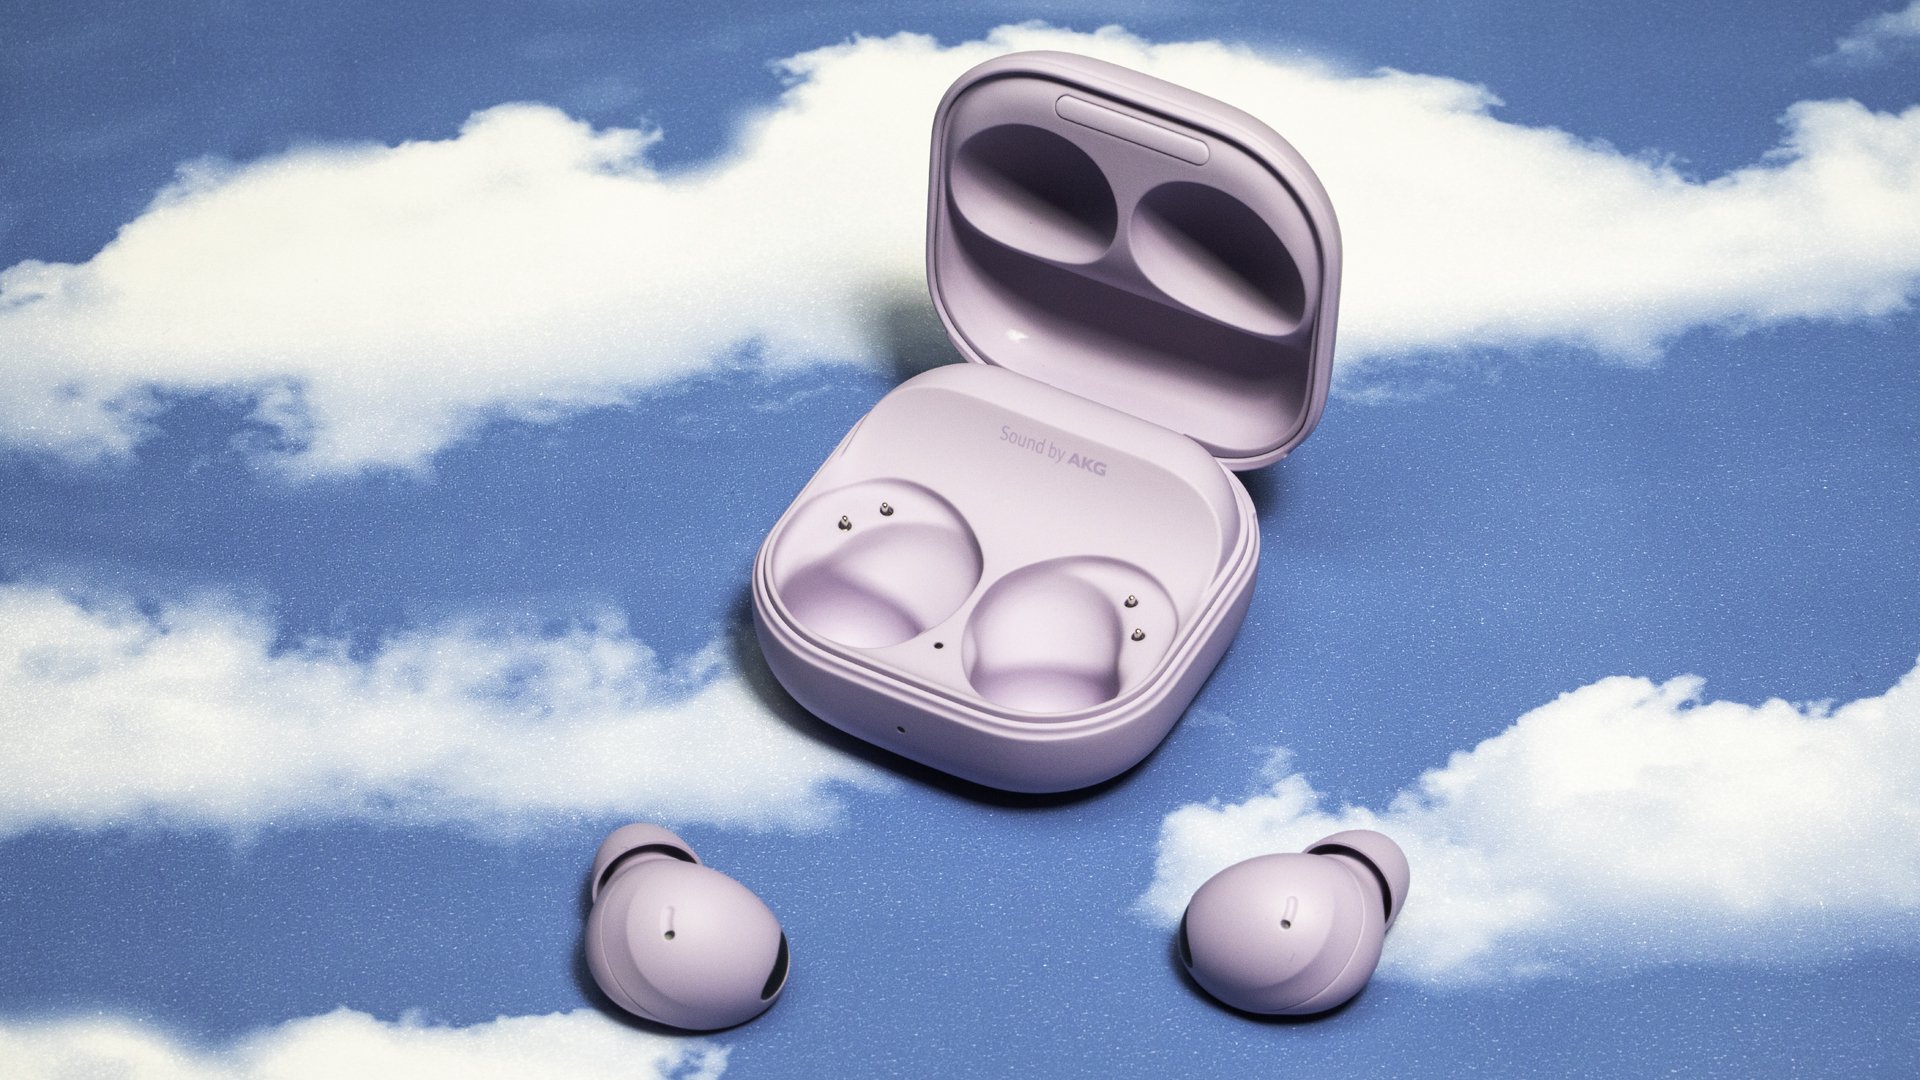 The Galaxy Buds 2 Pro are a no-brainer for Samsung fans